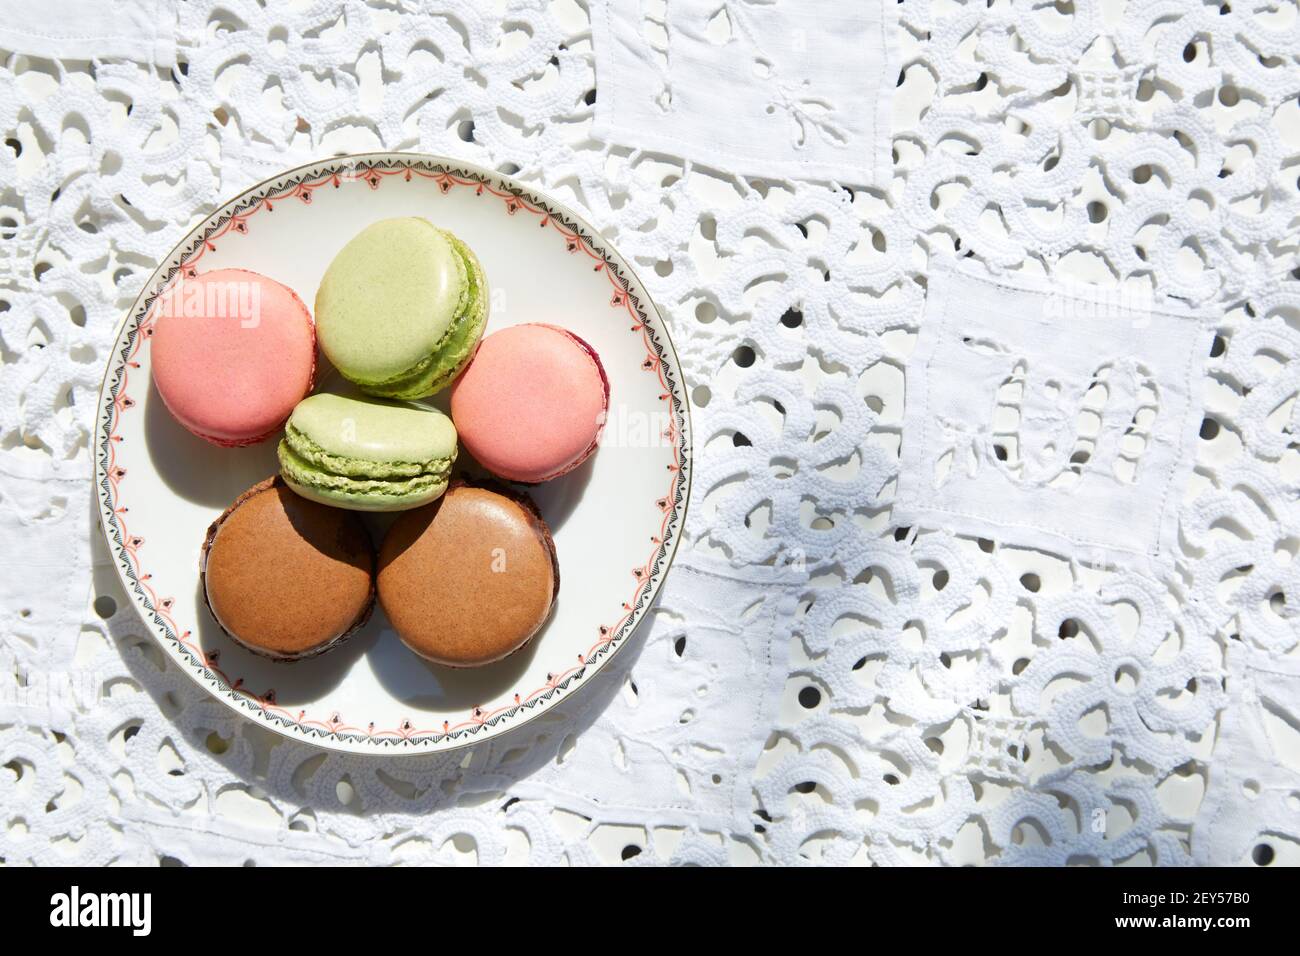 Macarons cookies in pink, green and brown colors with ceramic saucer, top view Stock Photo